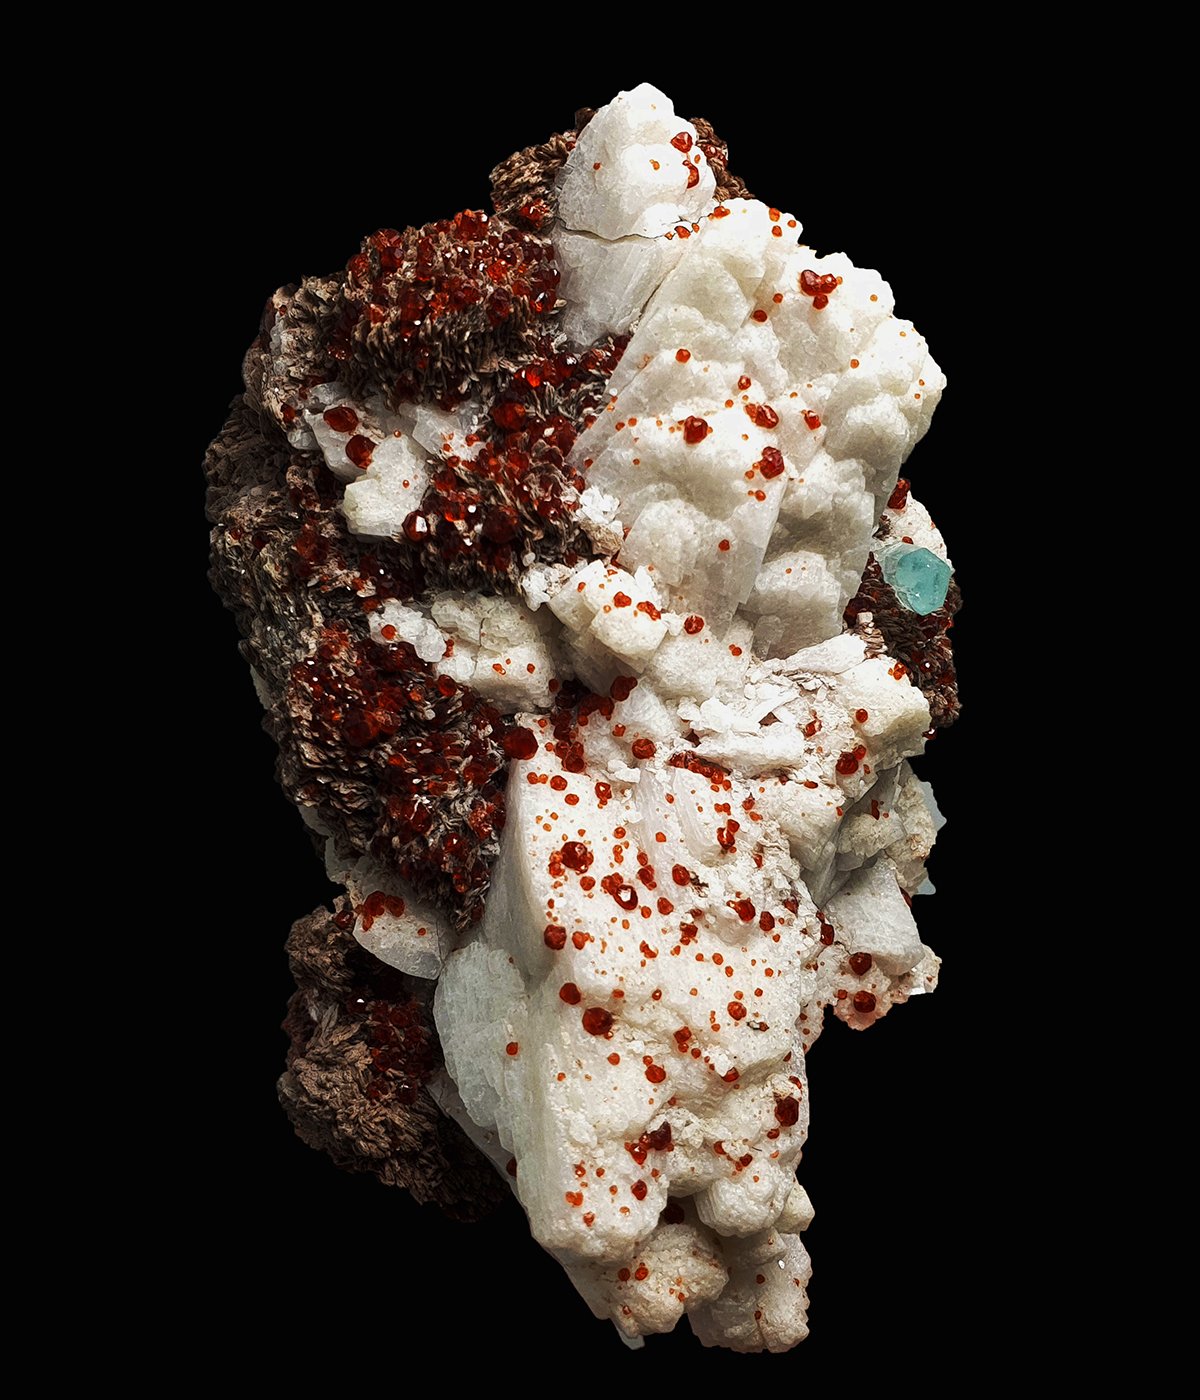 Gorgeous Spray of Red Spessartine Garnet on white Albite with nicely terminated Aquamarine crystal and Muscovite from Skardu, Gilgit, Pakistan